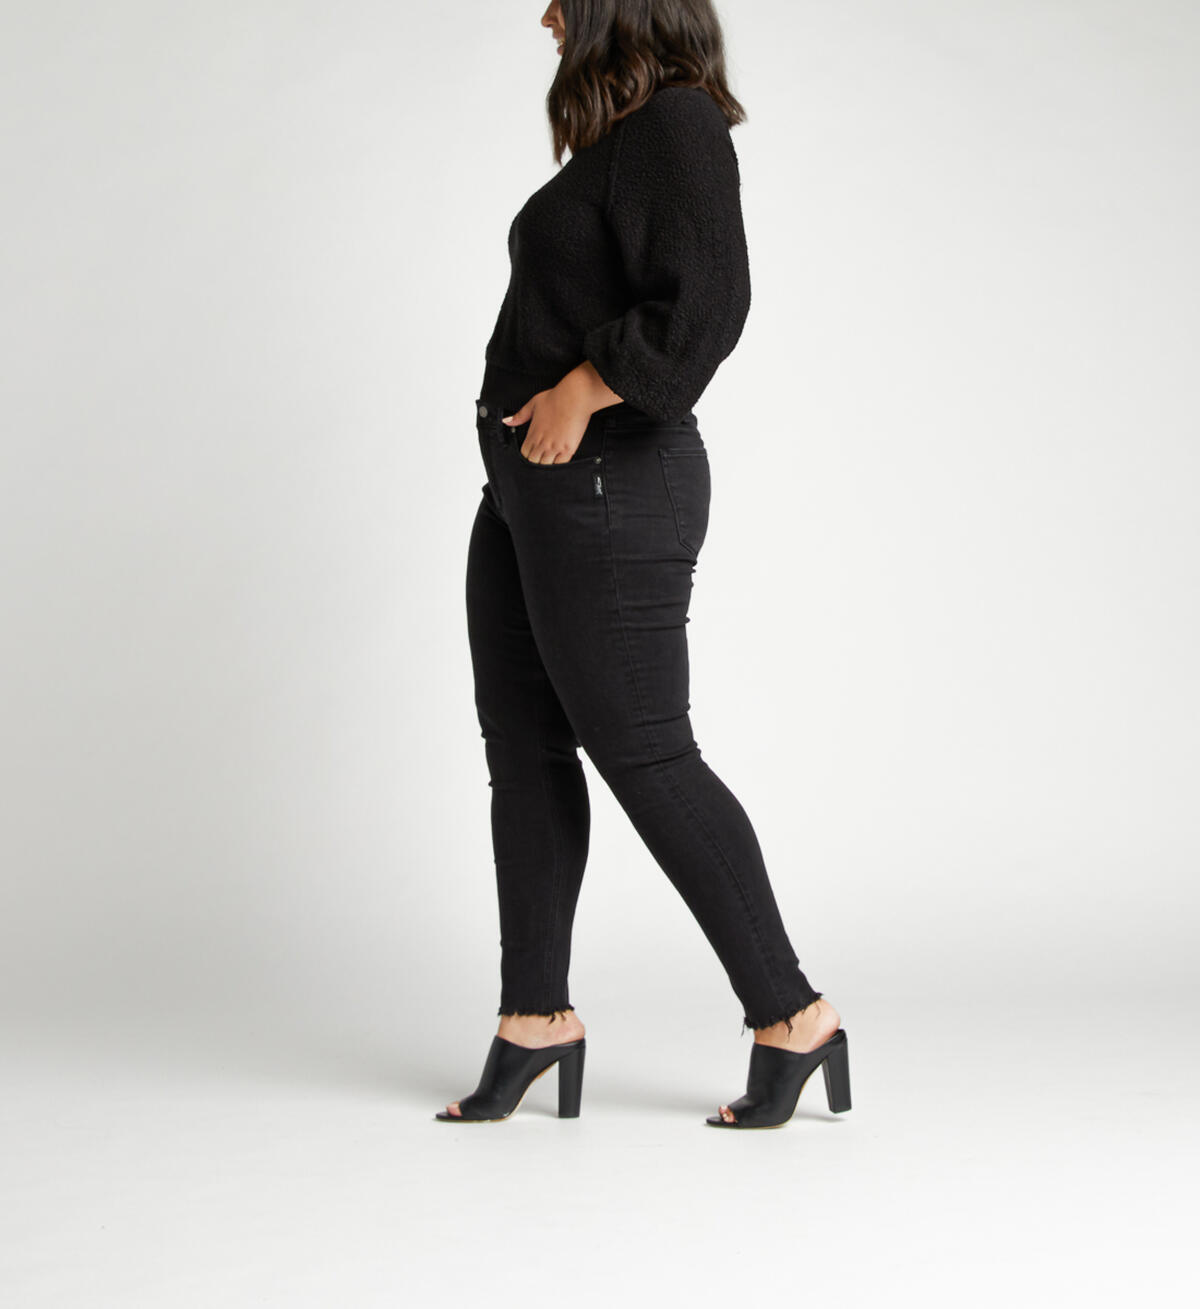 Avery High Rise Skinny Plus Size Jeans, , hi-res image number 2